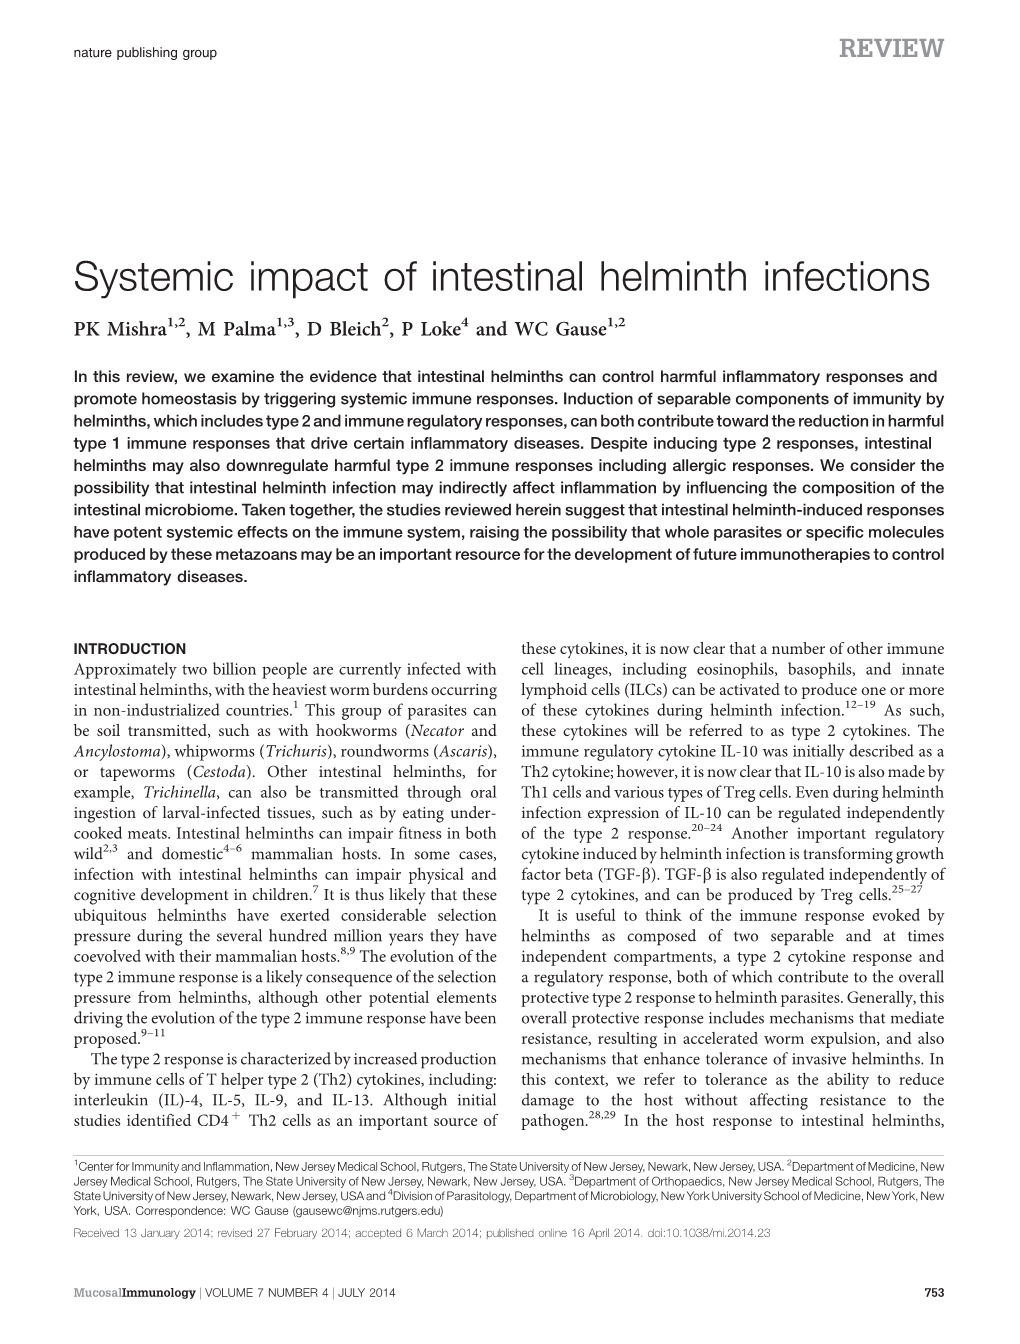 Systemic Impact of Intestinal Helminth Infections